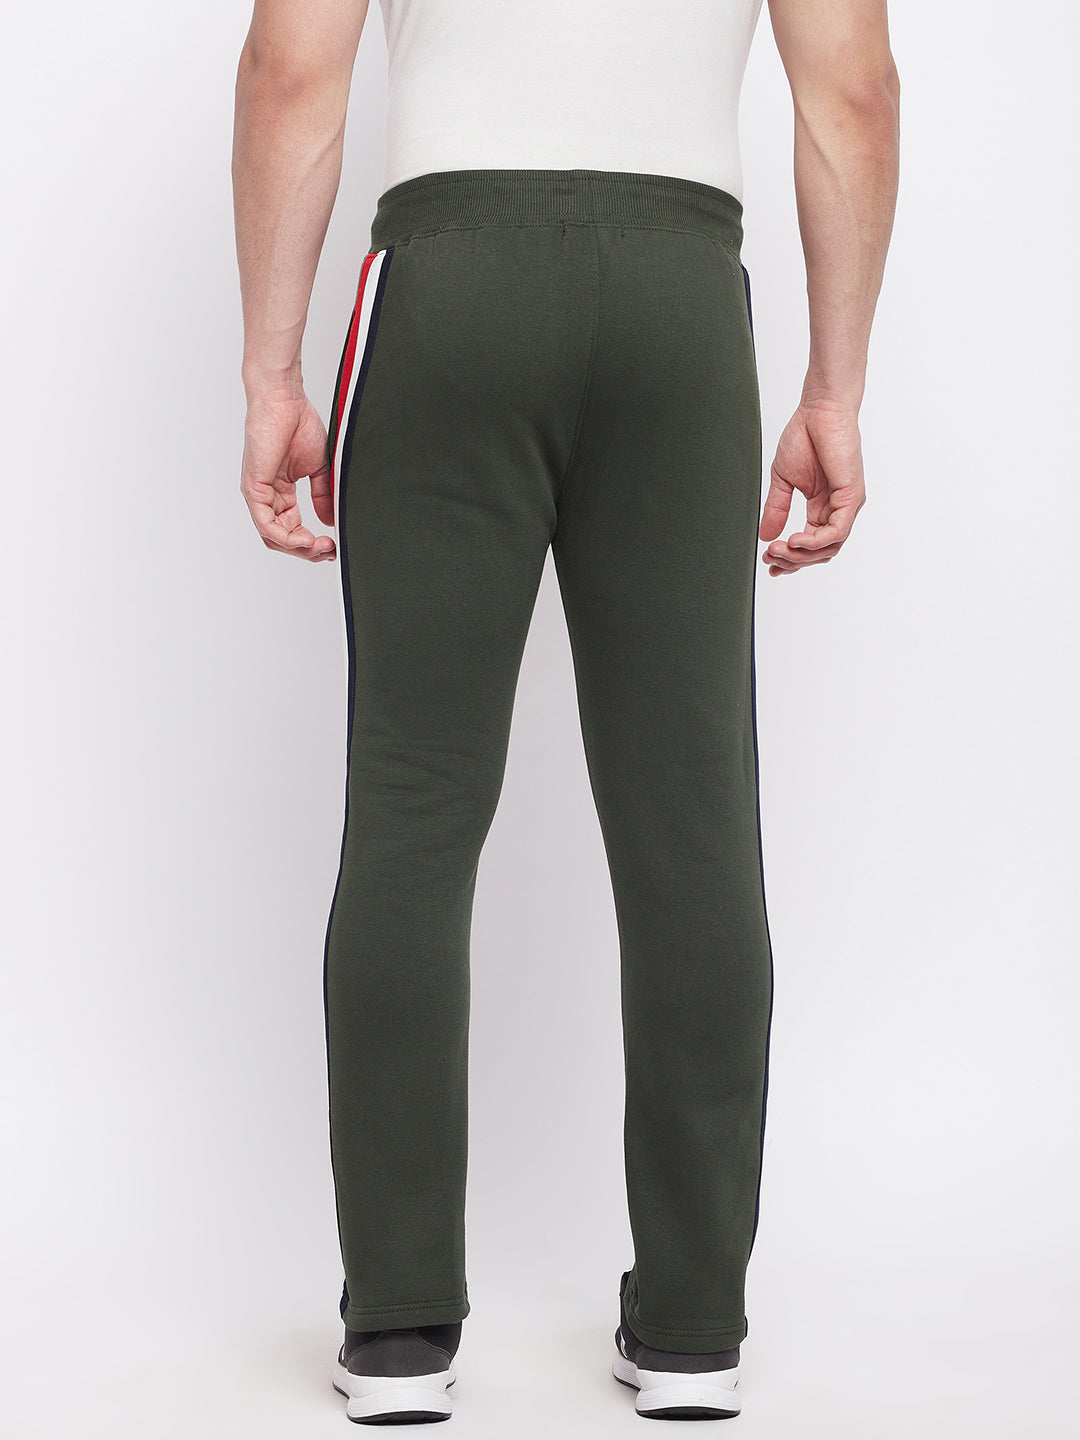 Buy winter track pants for men in India @ Limeroad